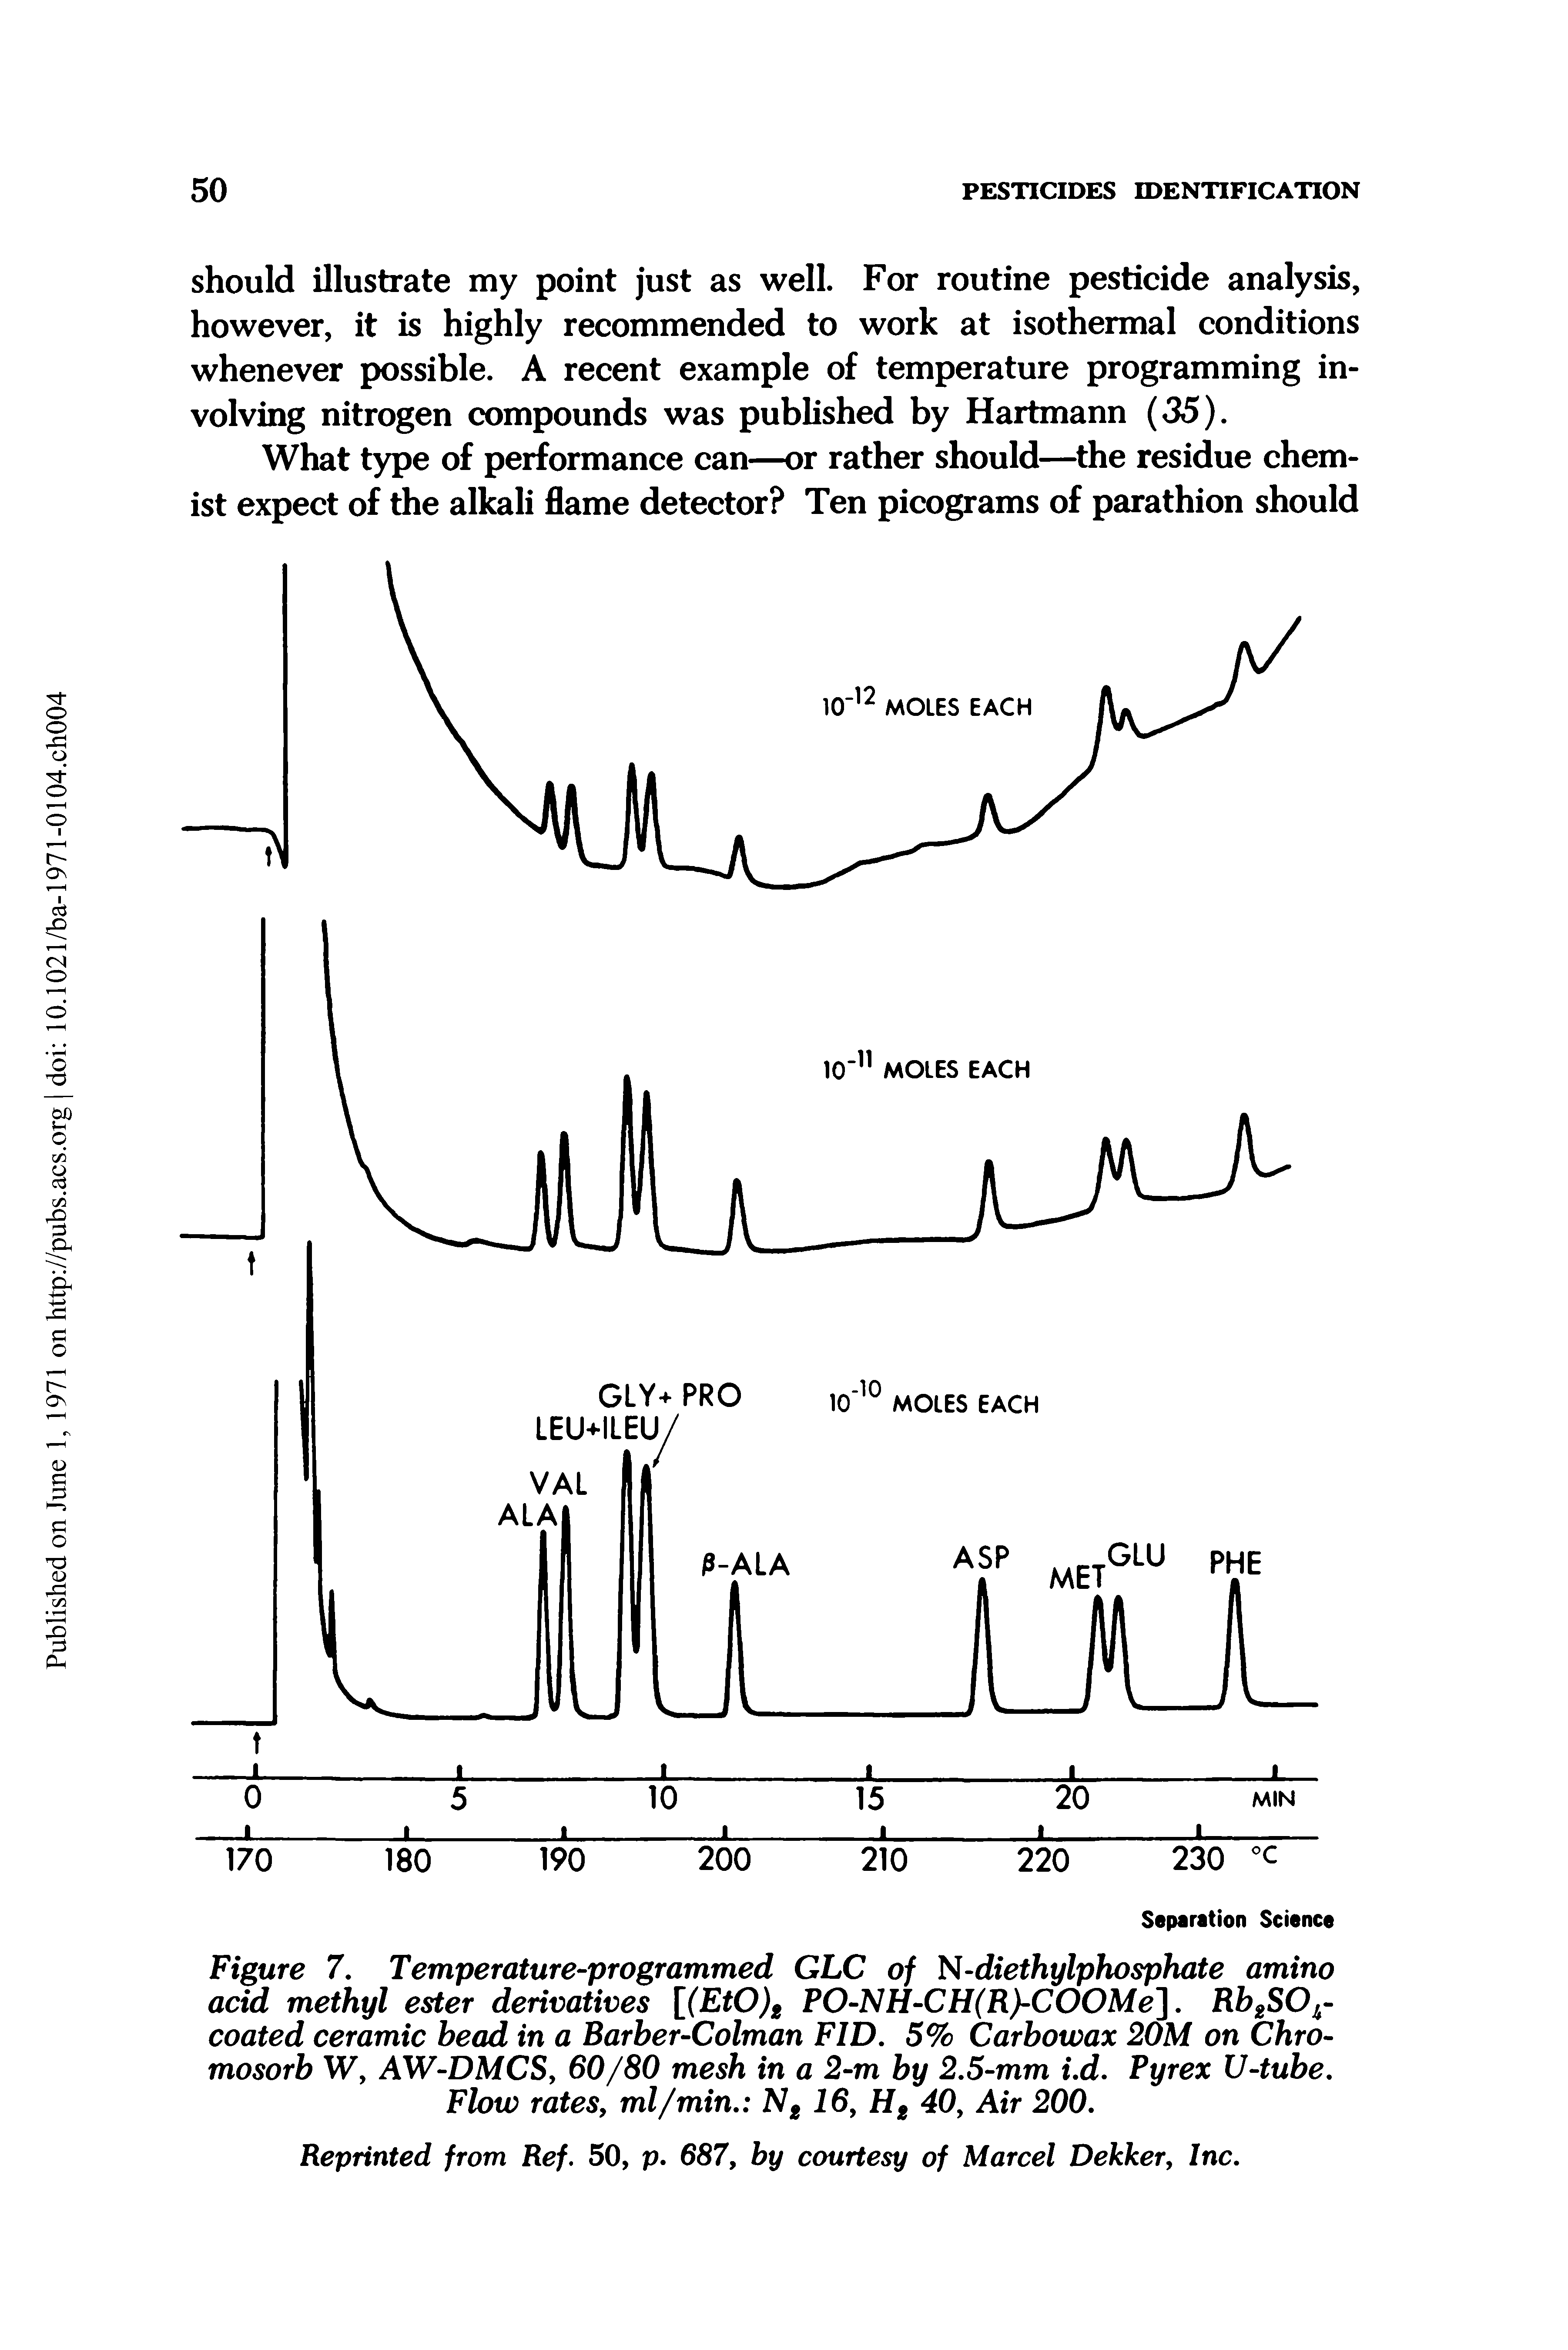 Figure 7. Temperature-programmed GLC of N-diethylphosphate amino acid methyl ester derivatives [(EtO)2 PO NH CH(R)-COOMe. RbgSO -coated ceramic bead in a Barber-Colman FID. 5% Carbowax 20M on Chro-mosorb W, AW-DMCS, 60/80 mesh in a 2-m by 2.5-mm i d. Pyrex U-tube.